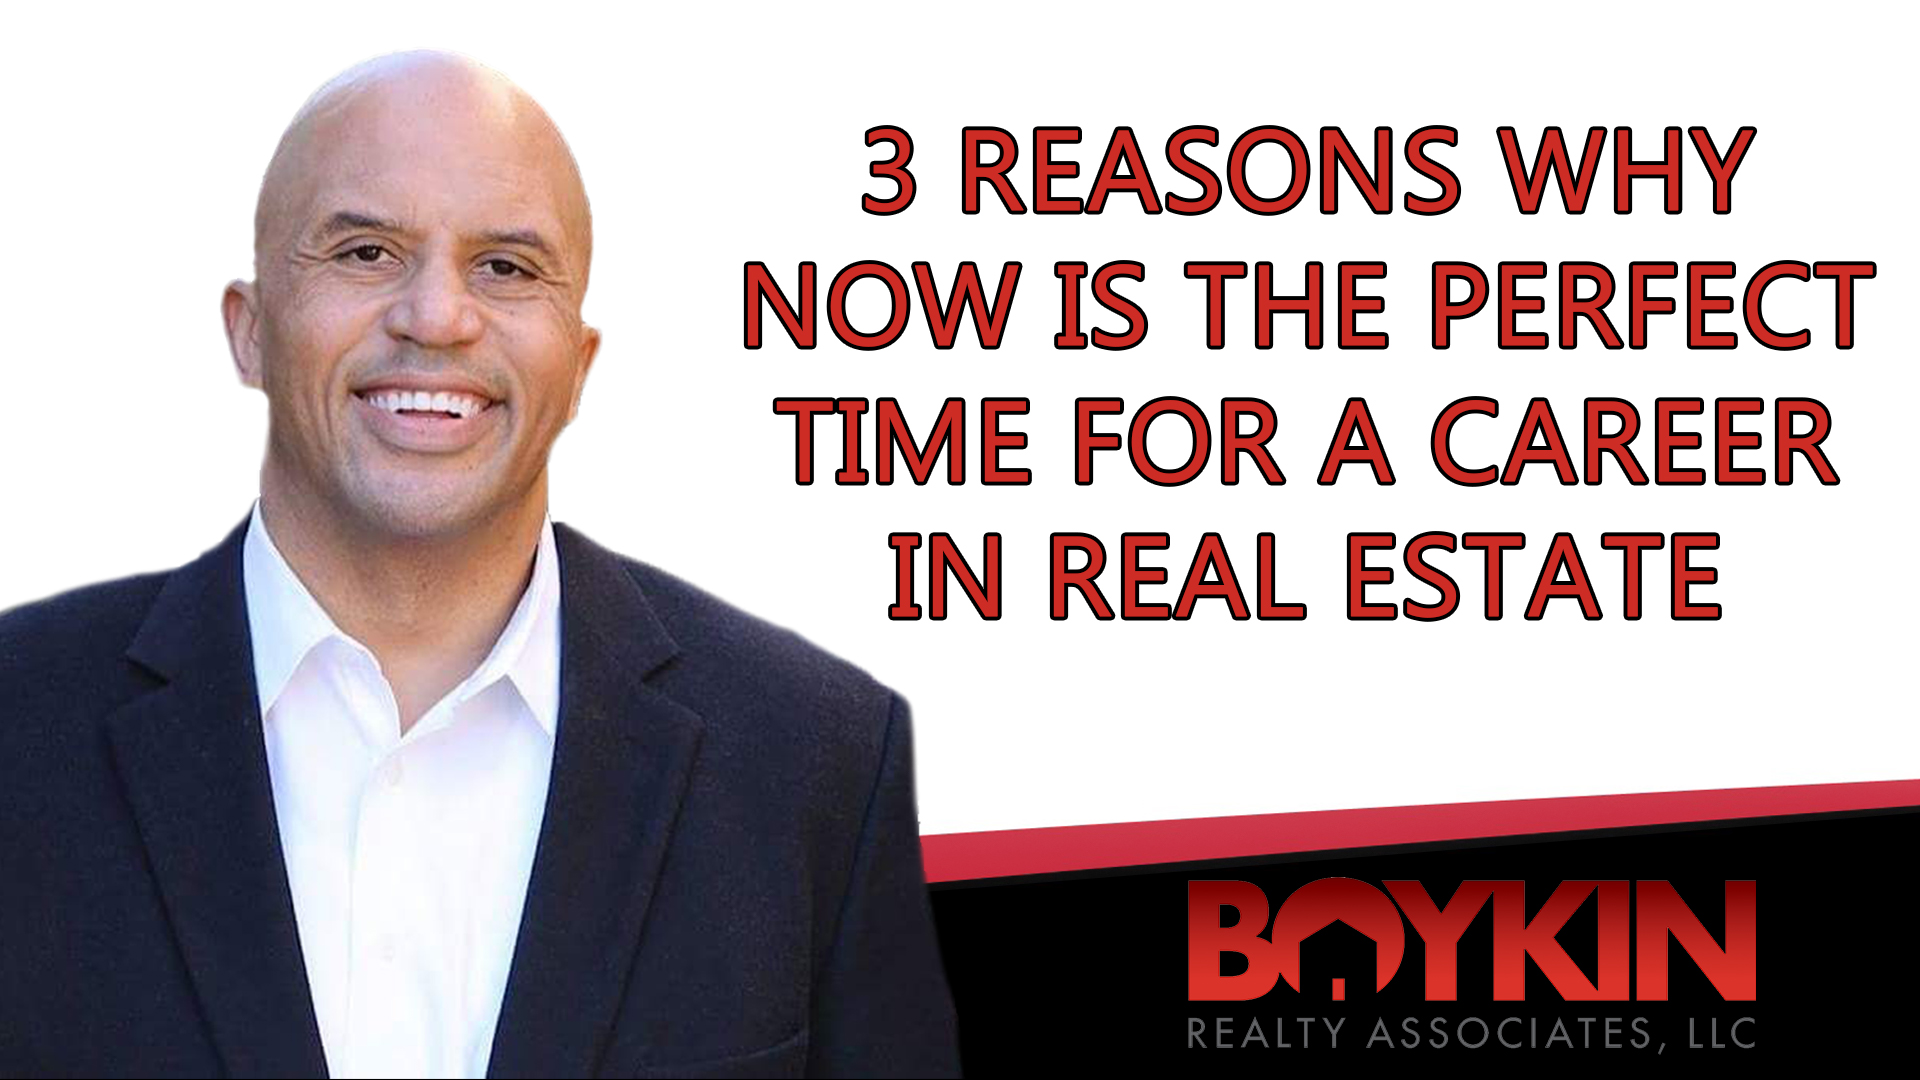 Have You Ever Thought About a Career in Real Estate?